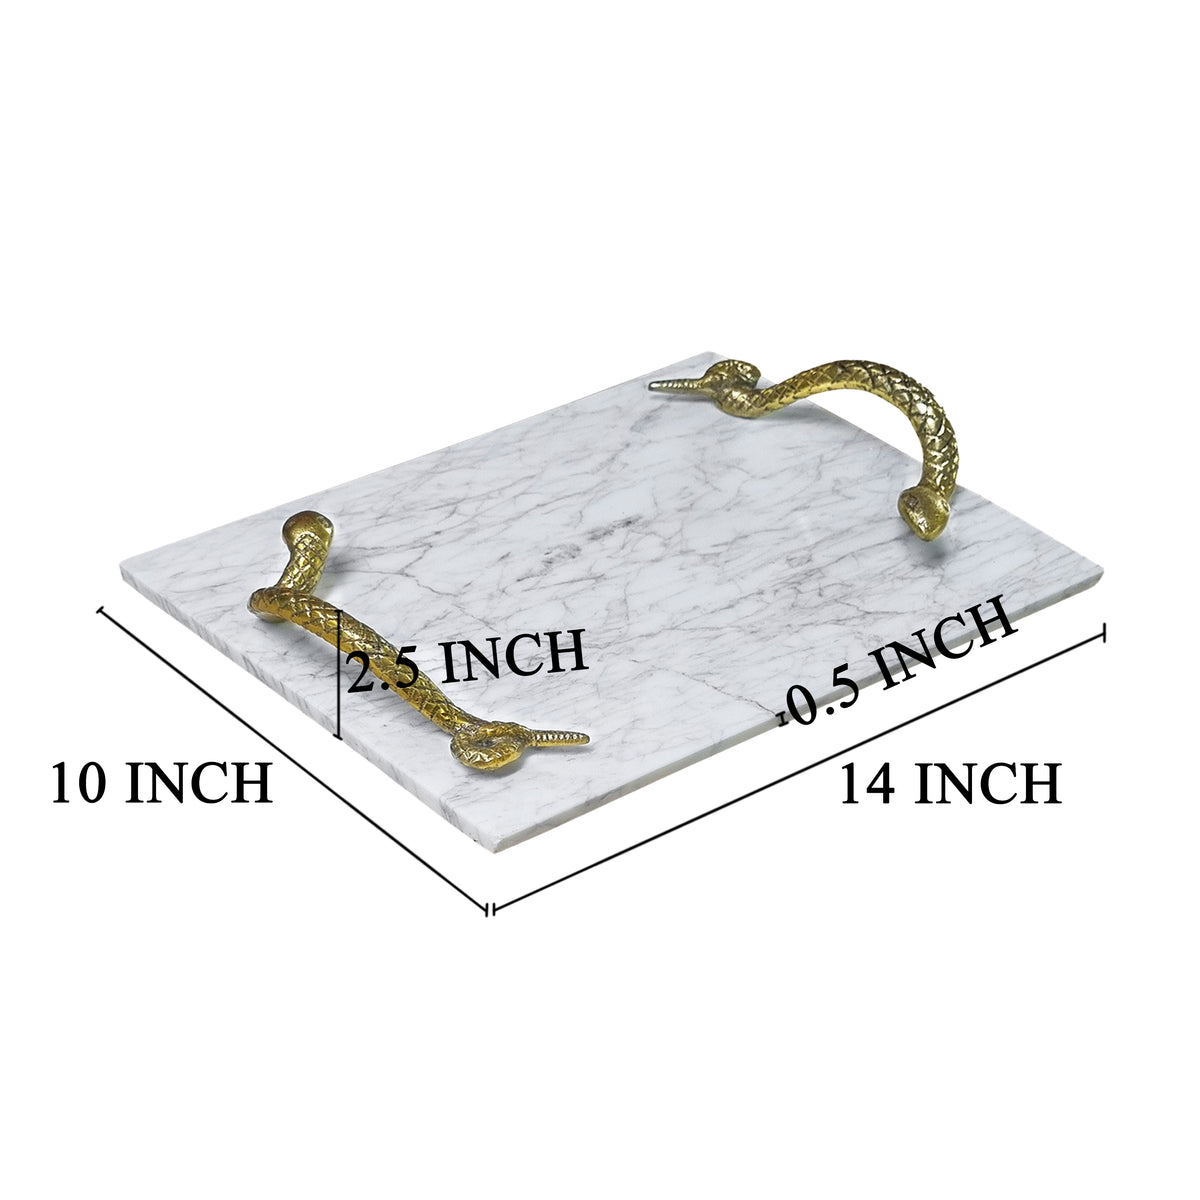 14 Inch Decorative Serving Tray, White Marble Stone with Brass Finished Snake Handles - UPT-295604